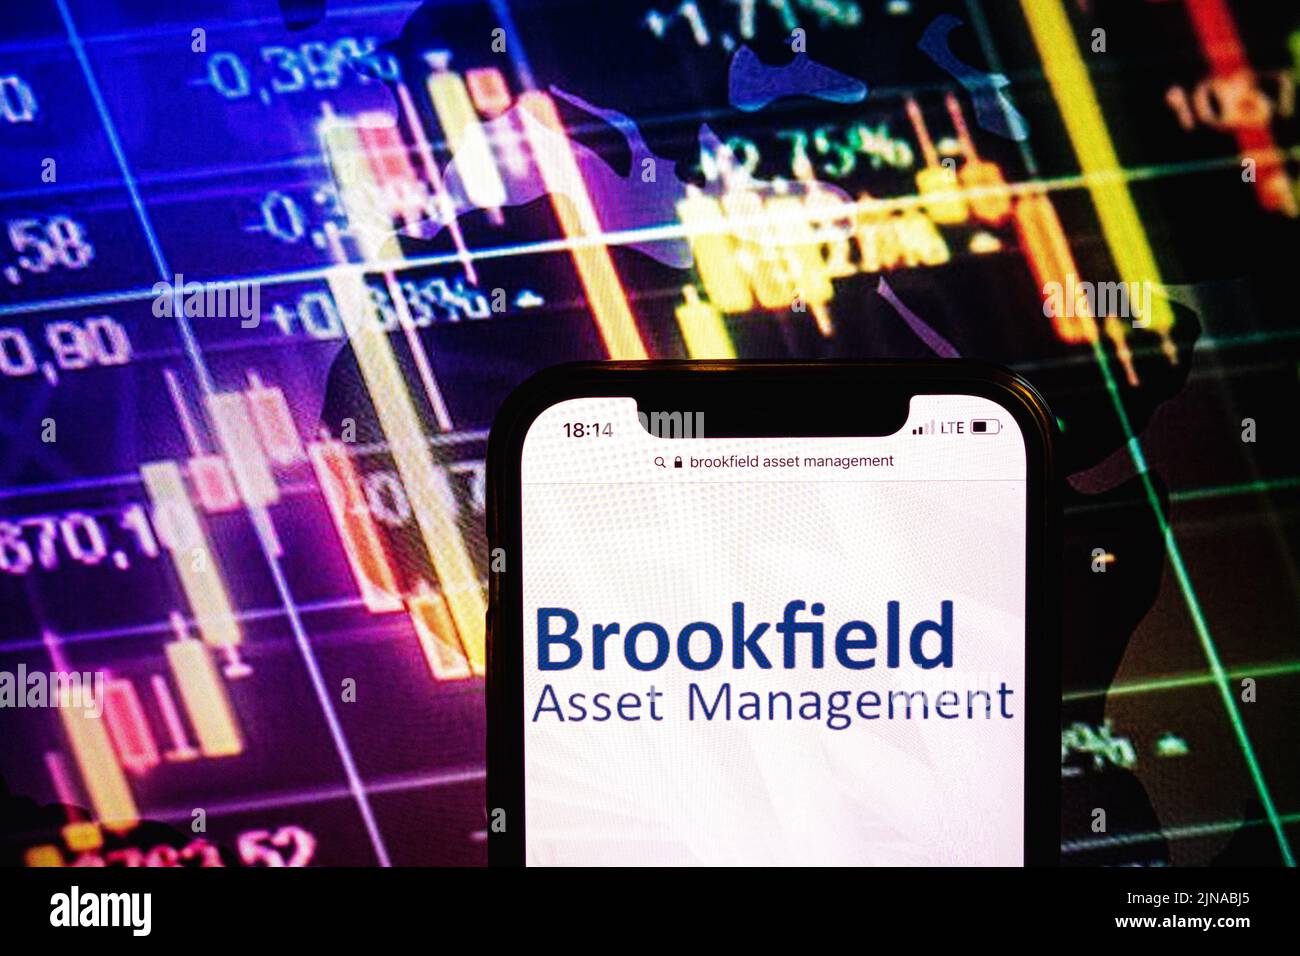 KONSKIE, POLAND - August 09, 2022: Smartphone displaying logo of Brookfield Asset Management company on stock exchange diagram background Stock Photo